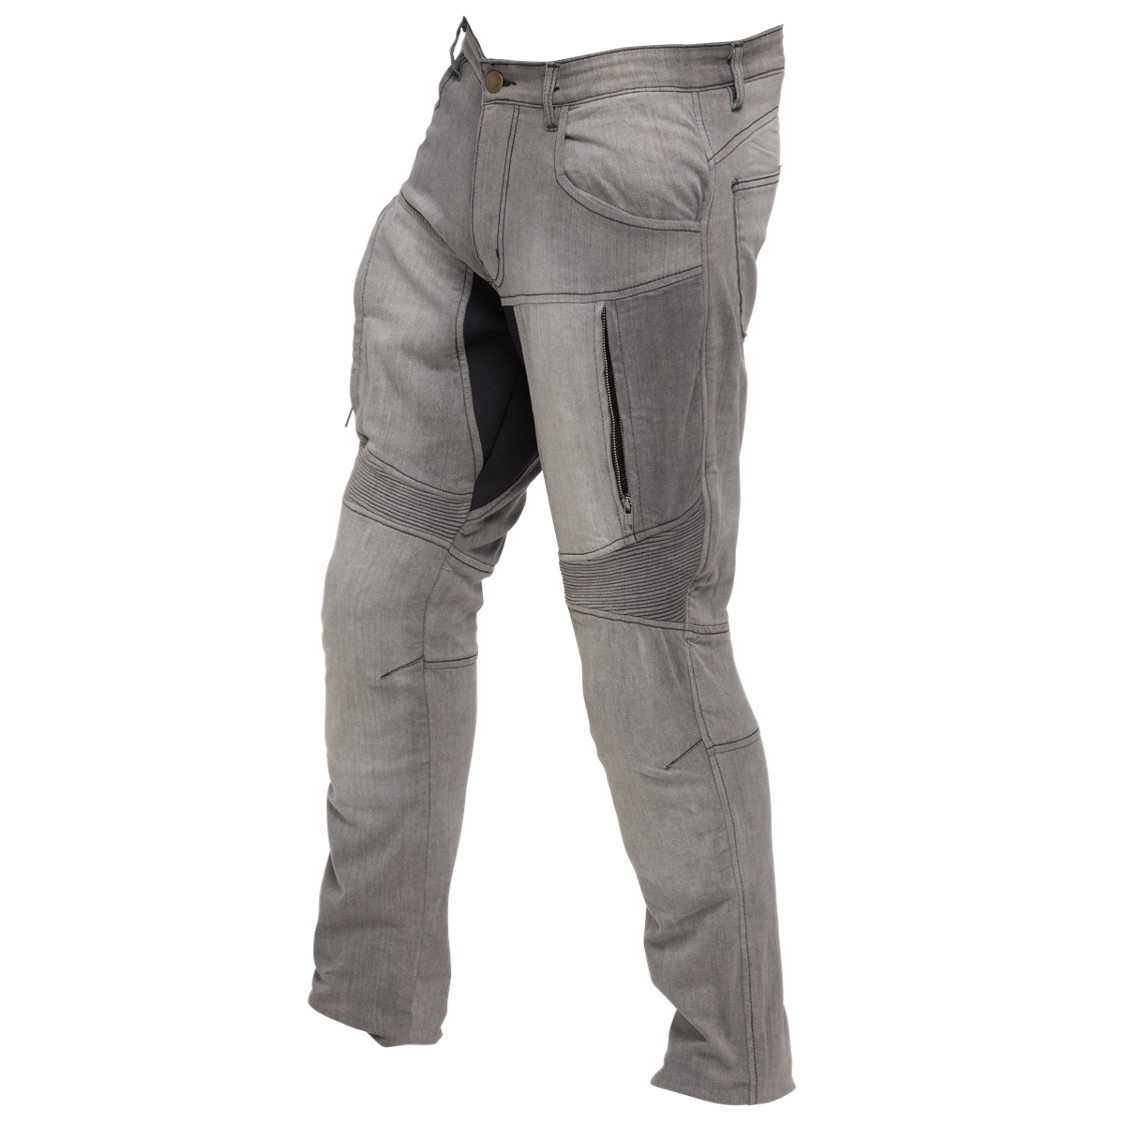 RAVEN Moto - Motorcycle Jeans | ASH Armored Jeans